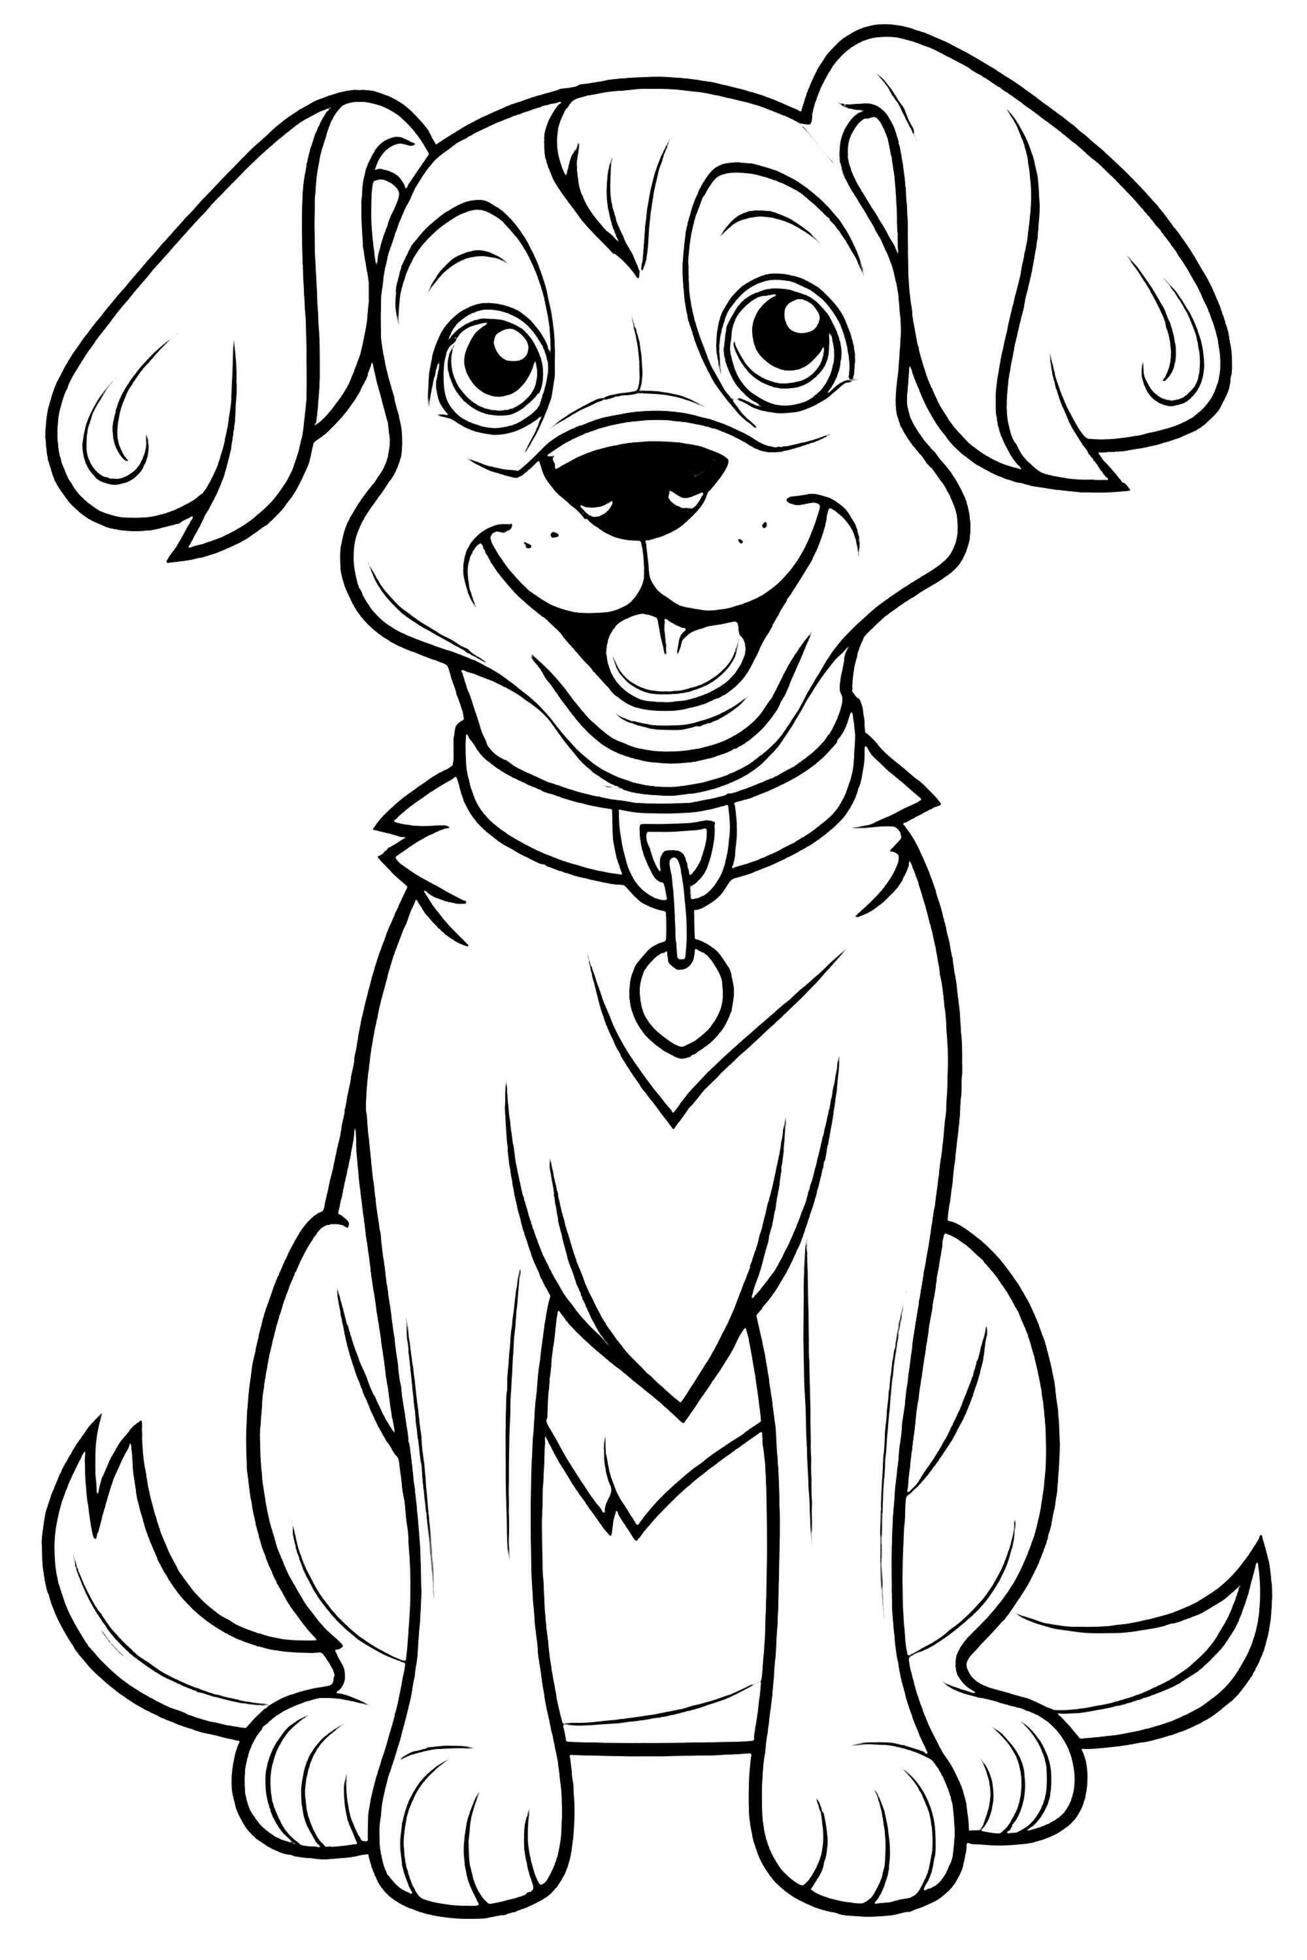 Coloring page outline of Kids Coloring Page 27986195 Stock Photo at ...